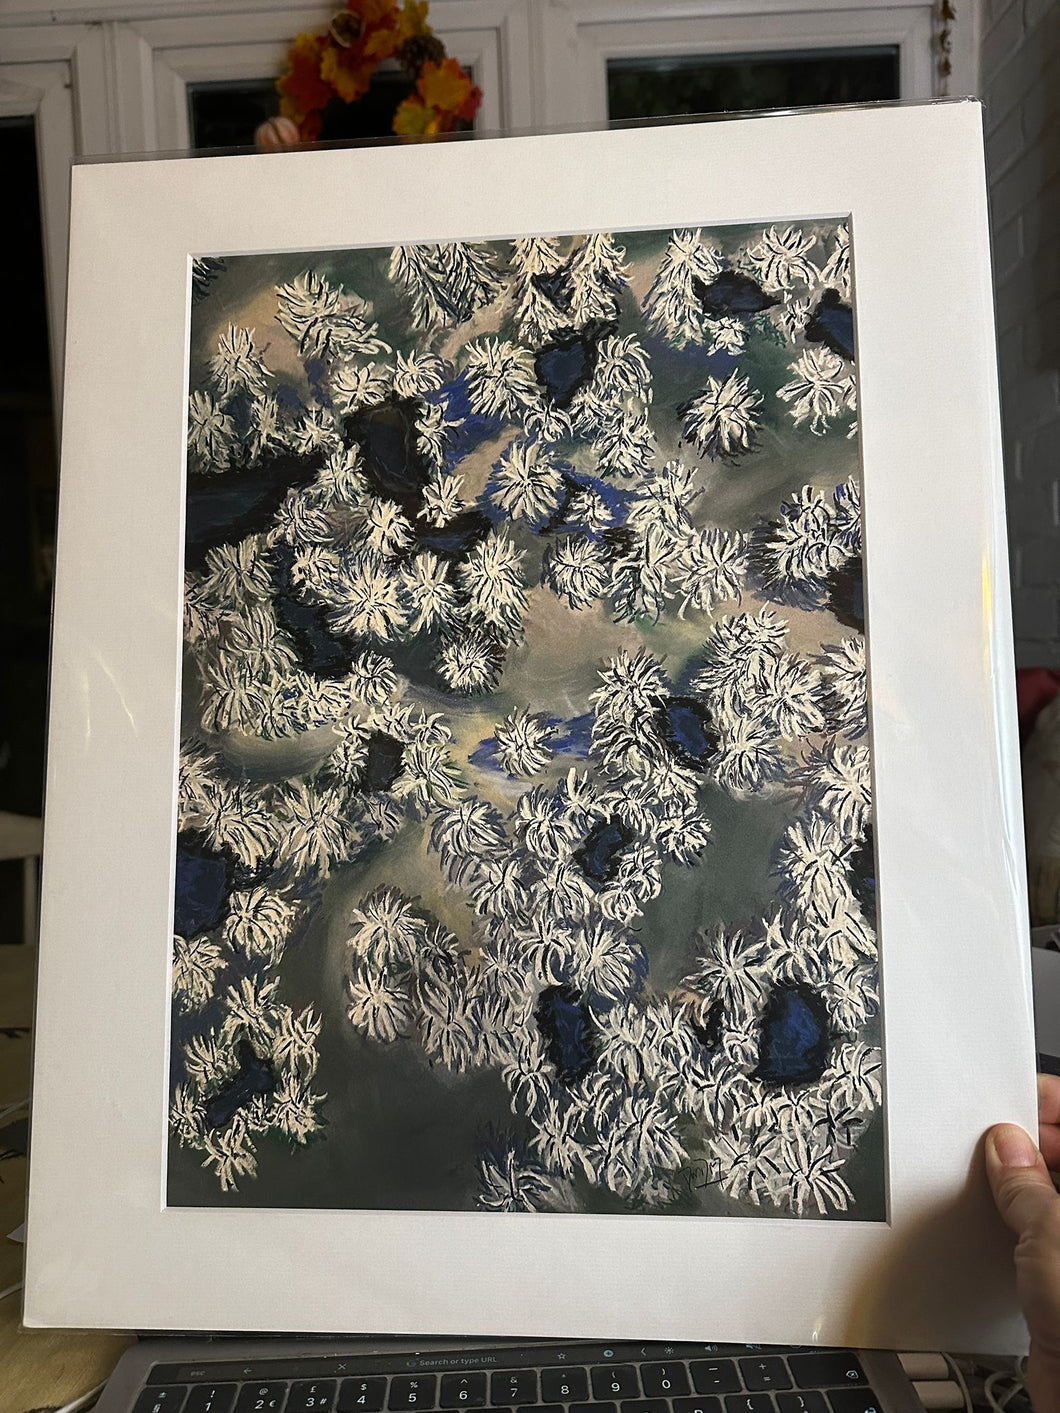 Limited -Edition Giclée Prints of Snowy Pine Trees seen from Above in different sizes